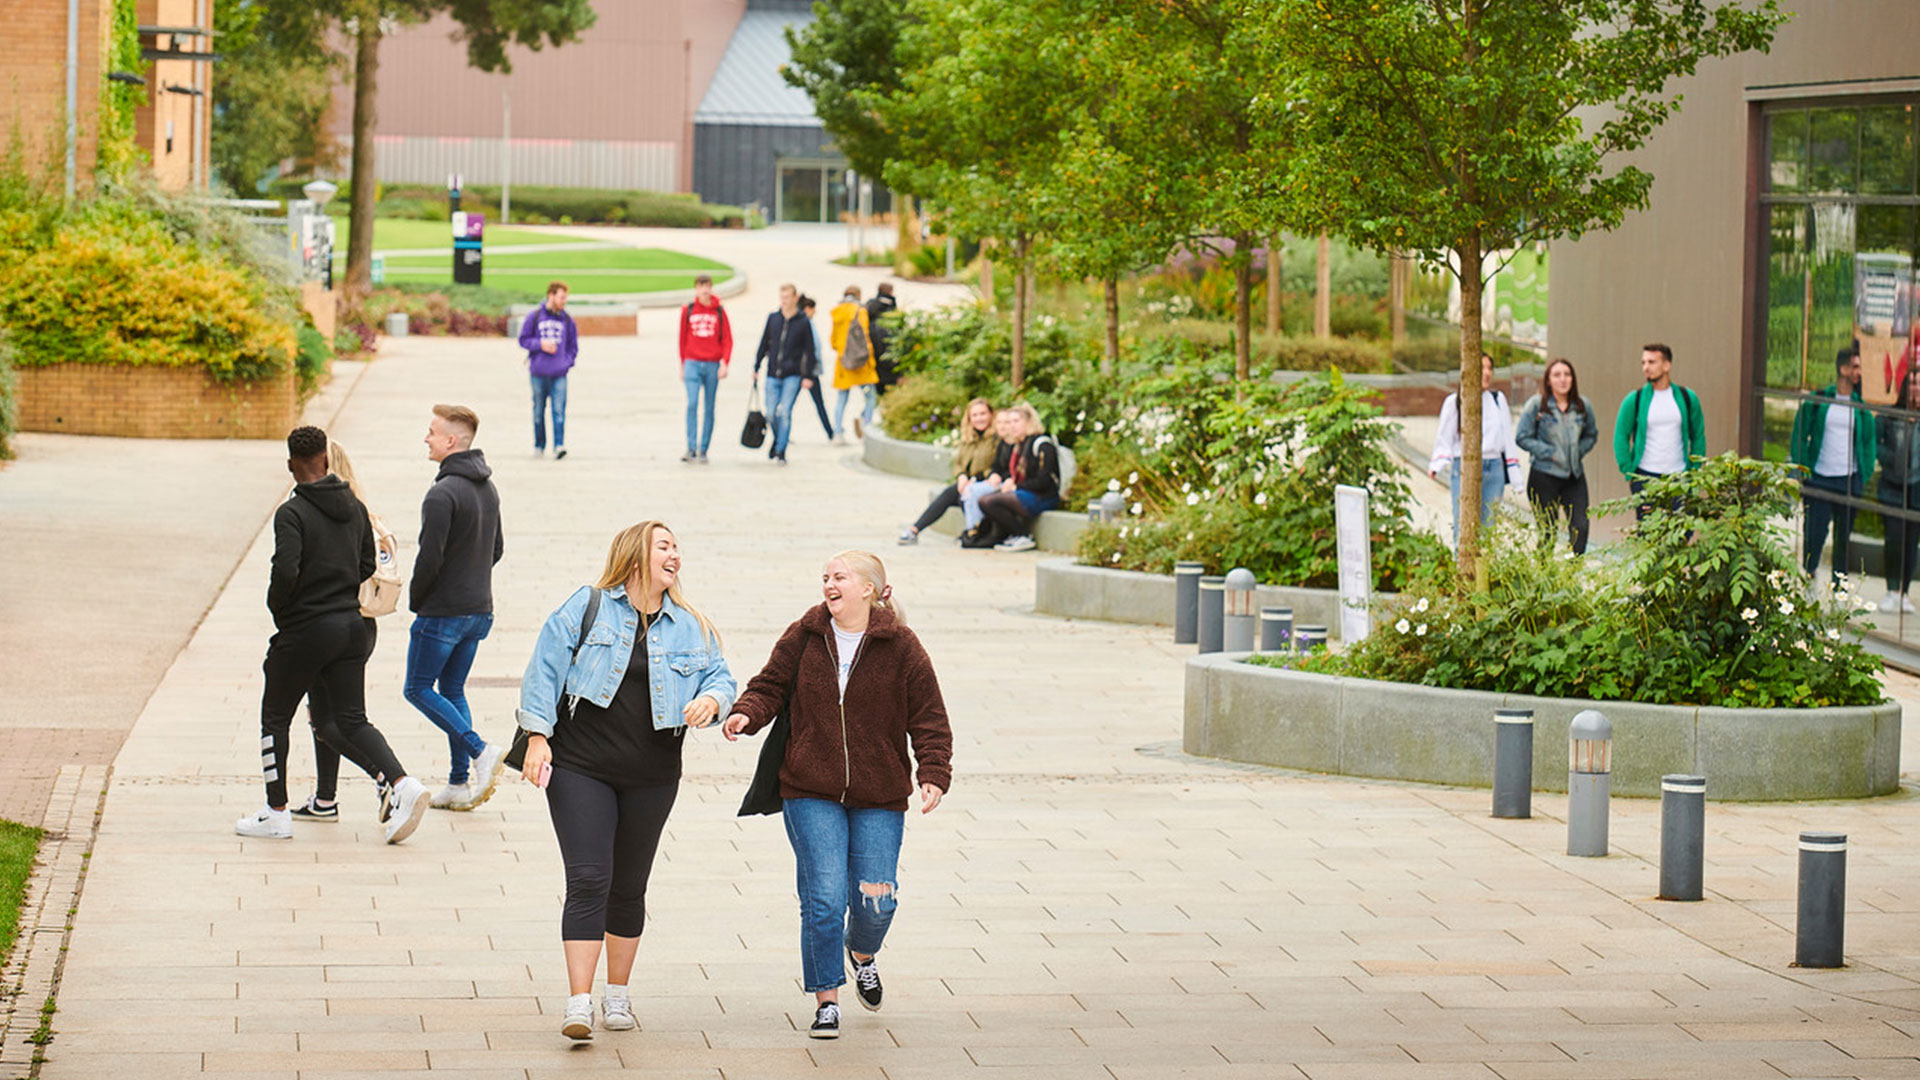 Two students walking together whilst laughing through campus. There are other groups of students walking together in the background.